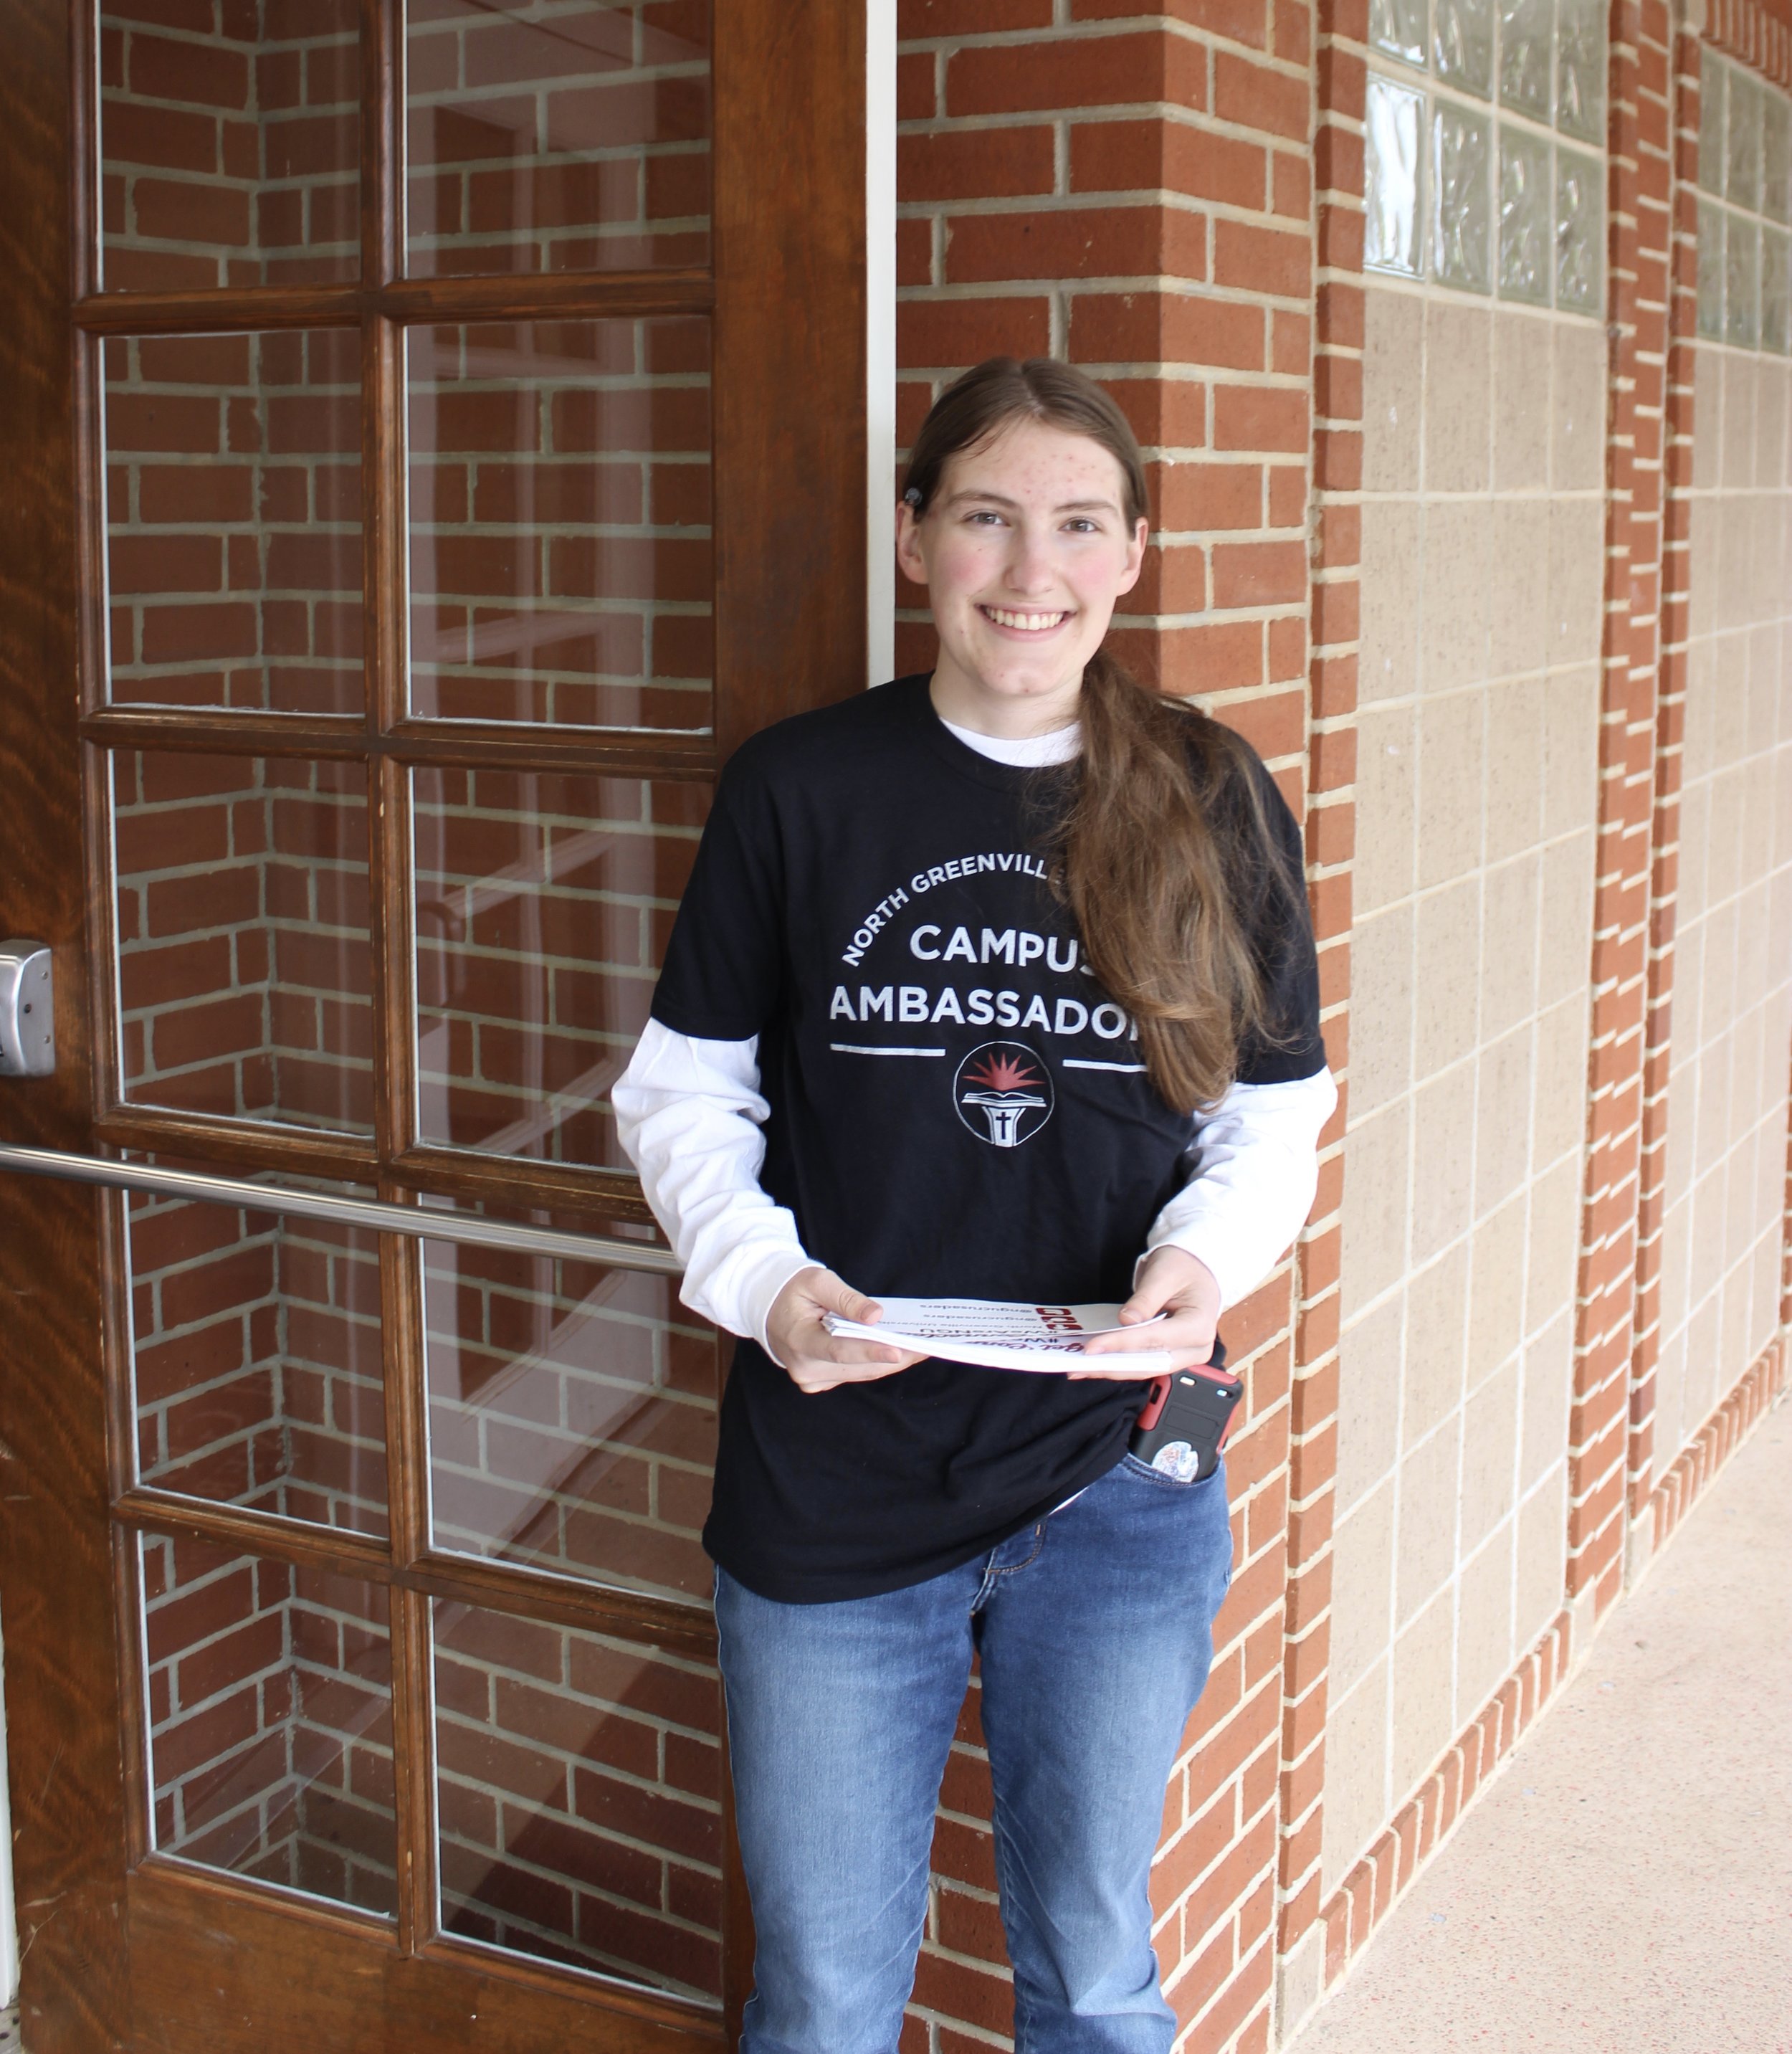 The open house was made a success through the hardworking and welcoming campus ambassadors such as Karley Conklin.&nbsp;